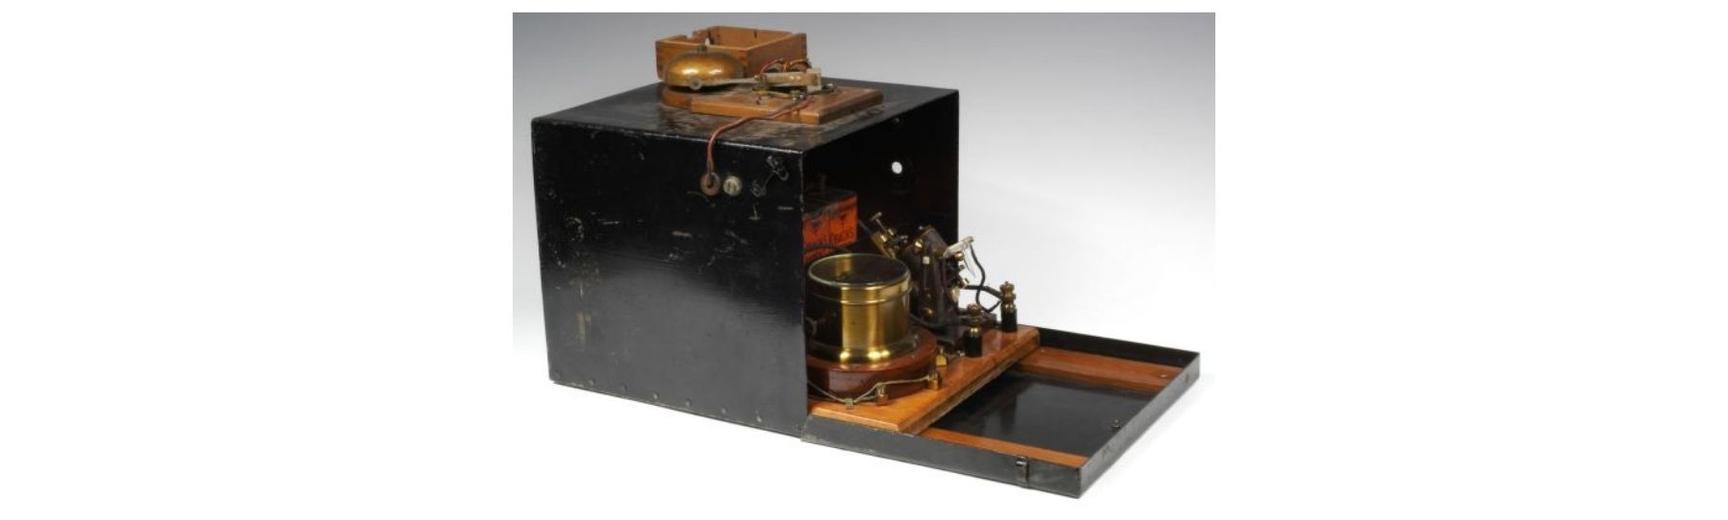 86390 Marconi's Coherer Receiver, by Guglielmo Marconi, English, 1896